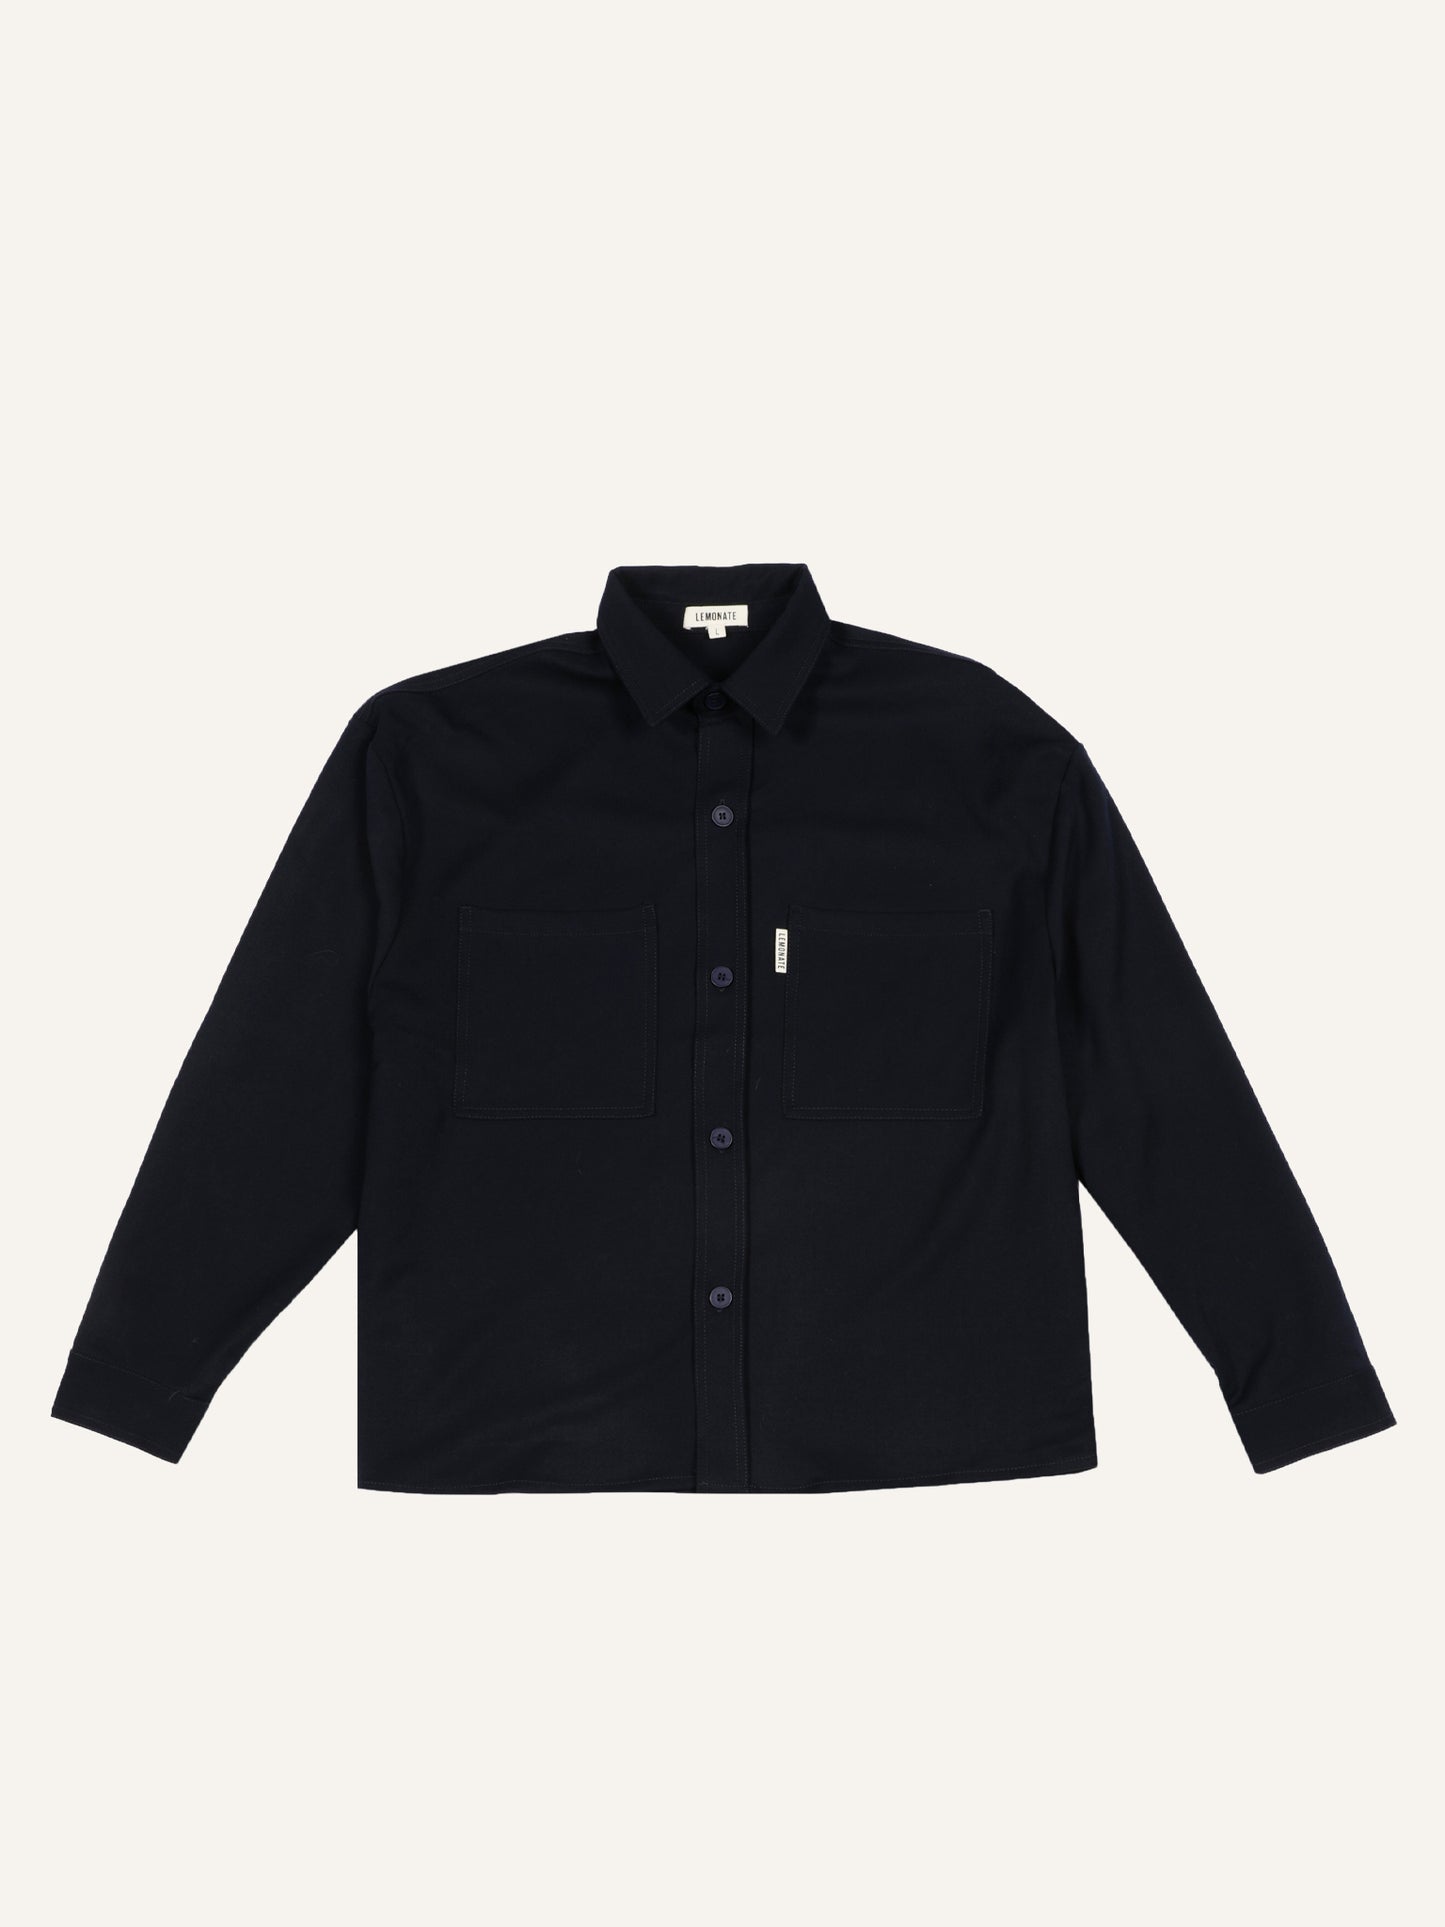 OVERSHIRT WITH POCKETS NAVY BLUE